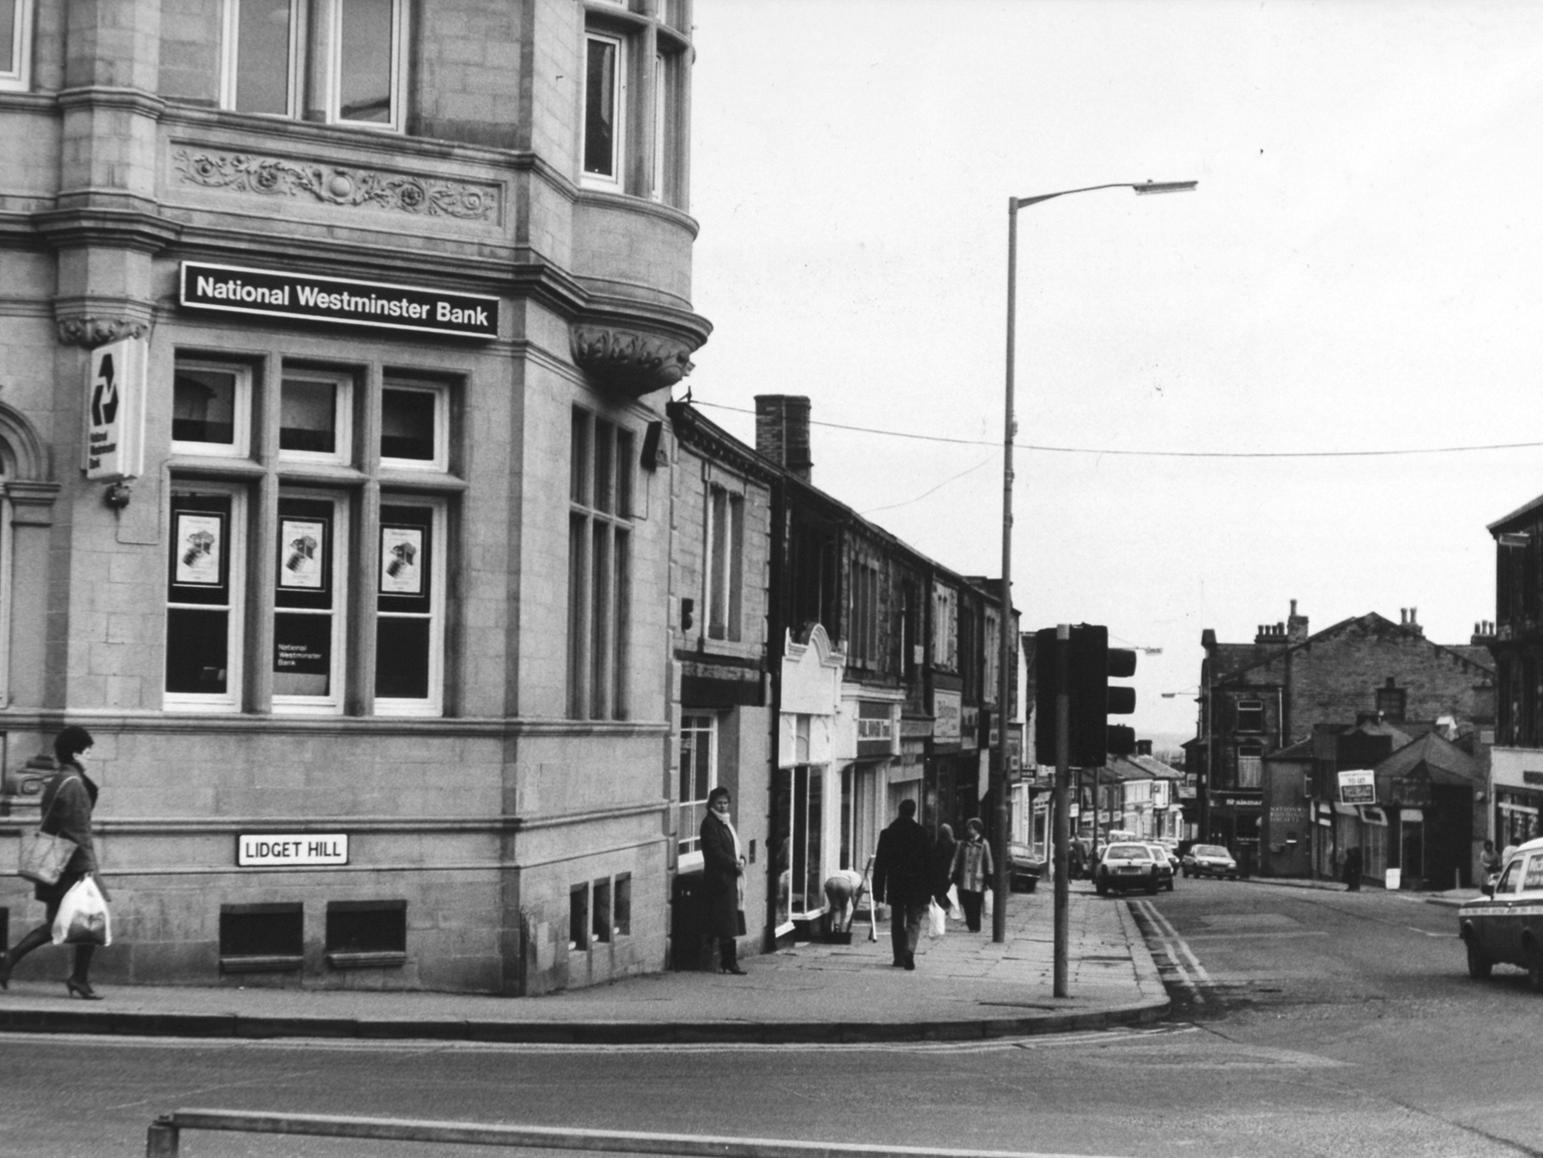 Lidgett Hill. The NatWest was the scene of an armed raid.